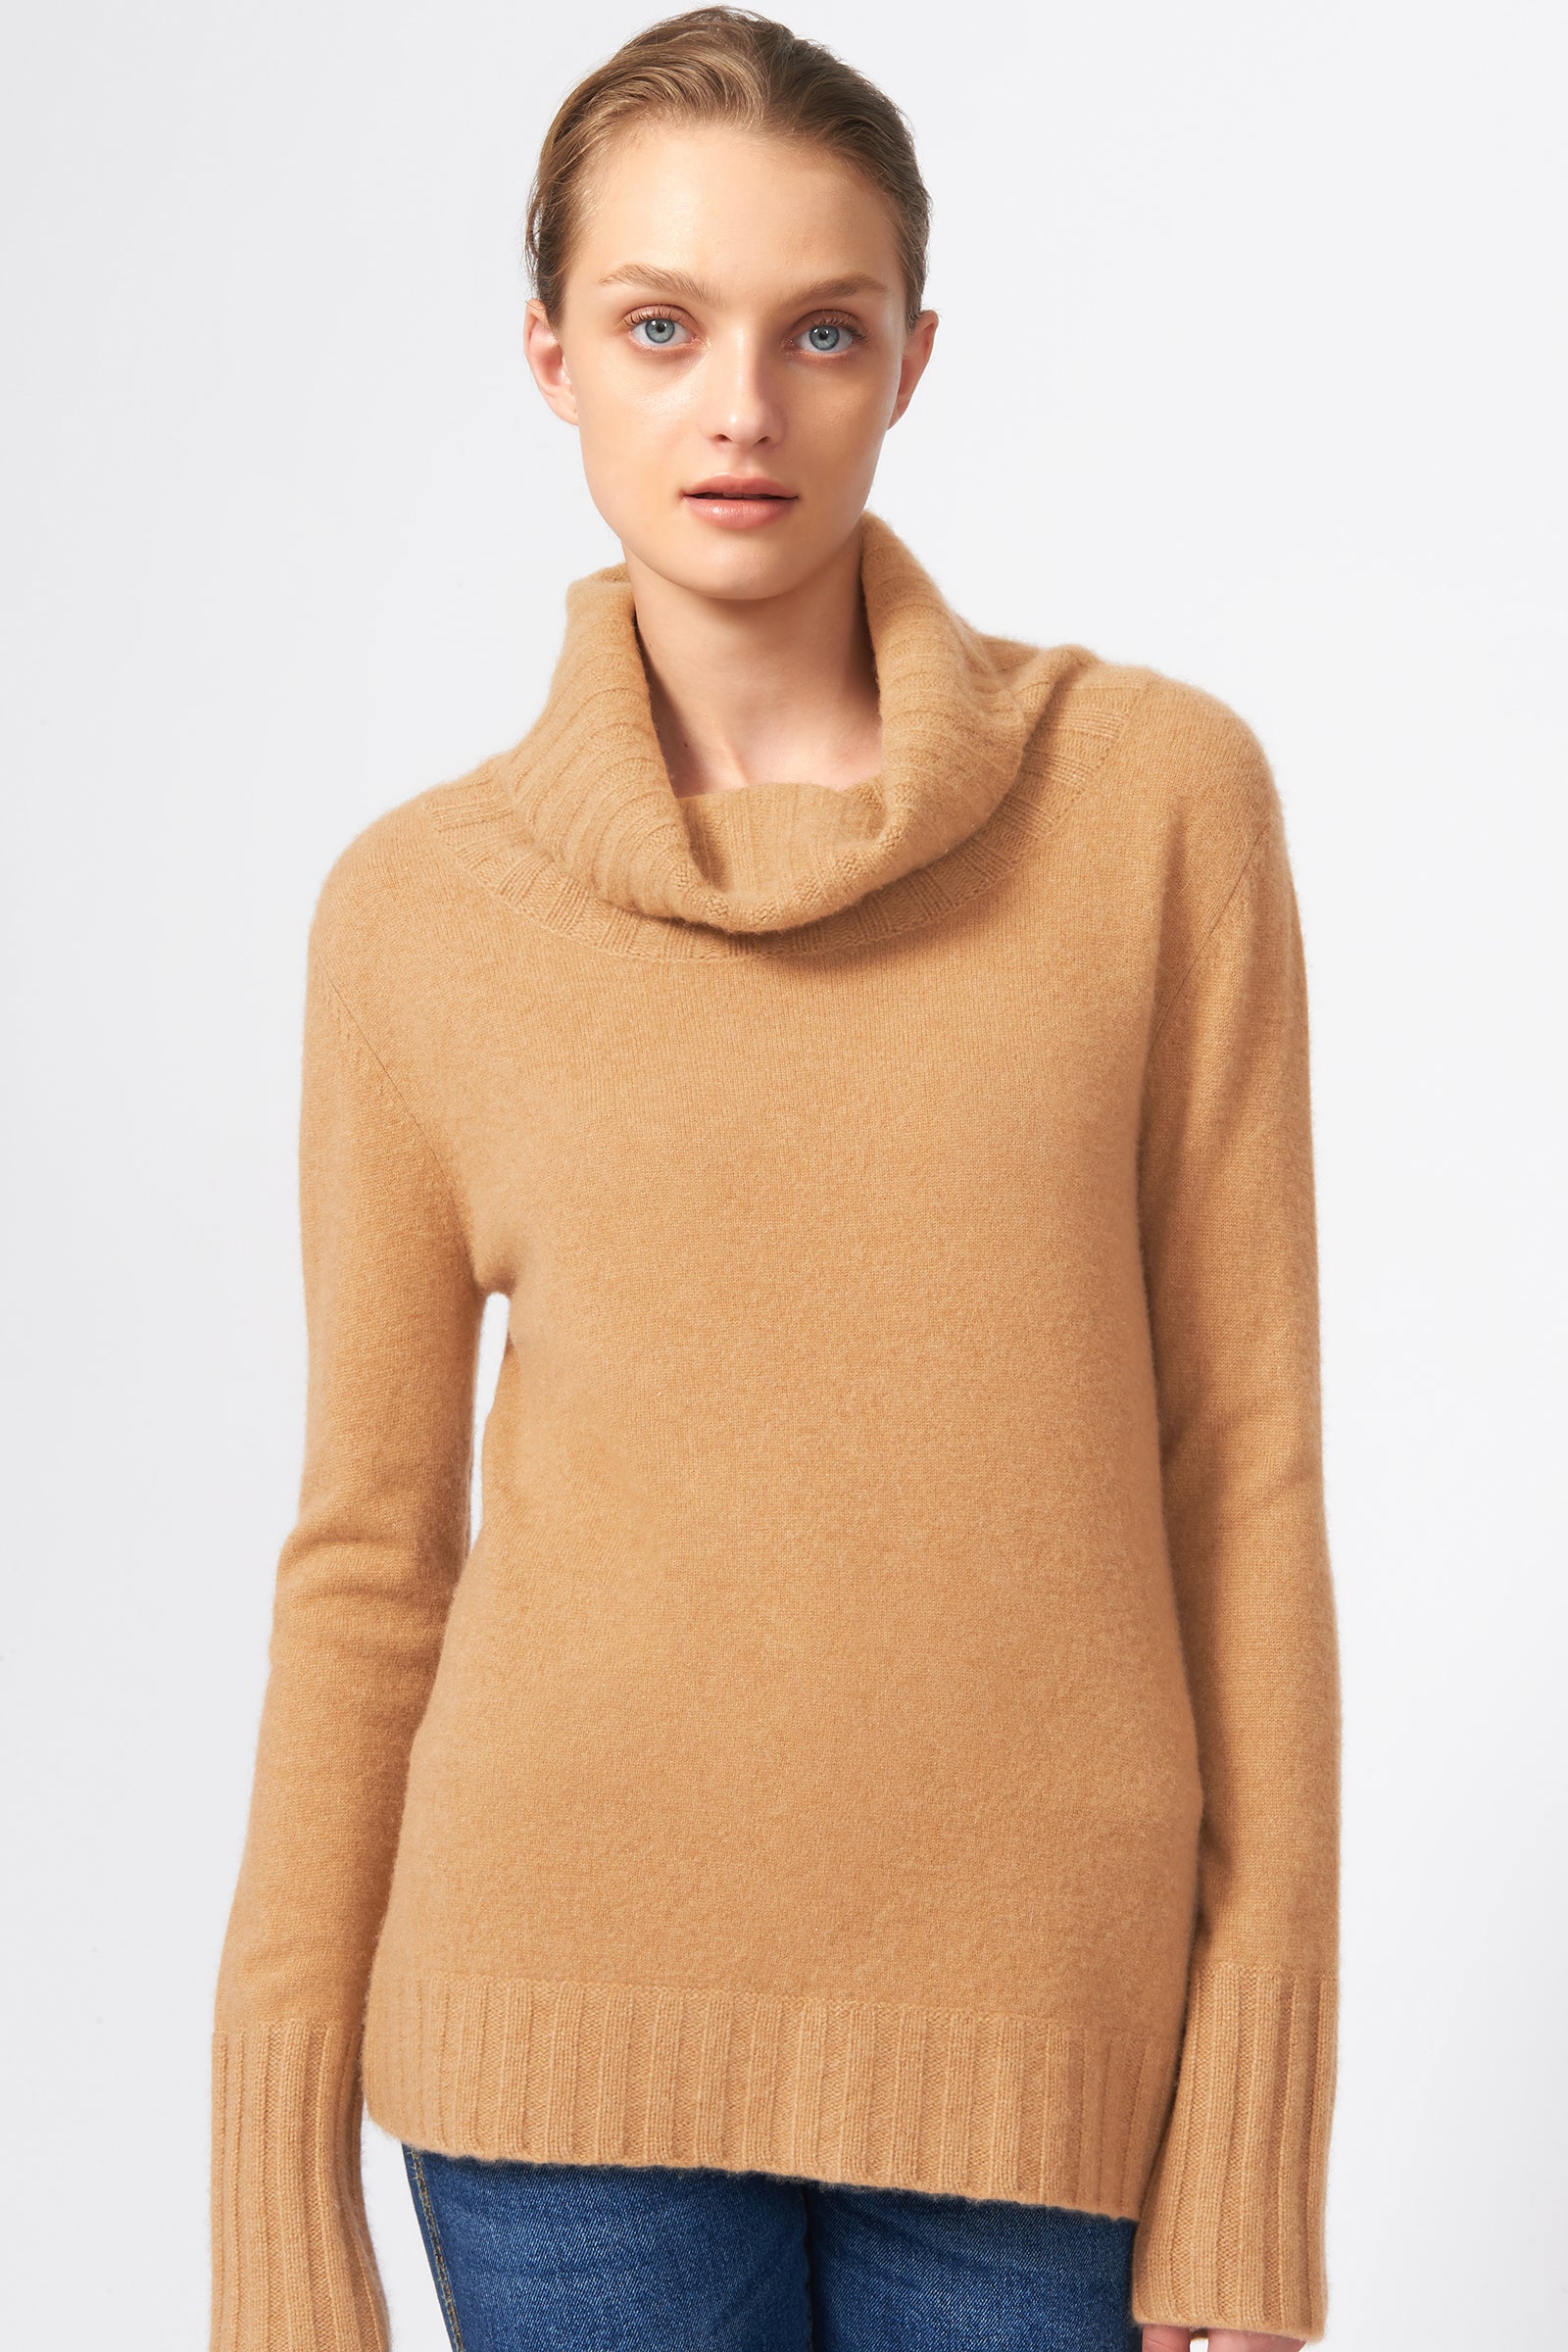 Kal Rieman Cashmere Cowel T-Neck in Camel on Model Front View